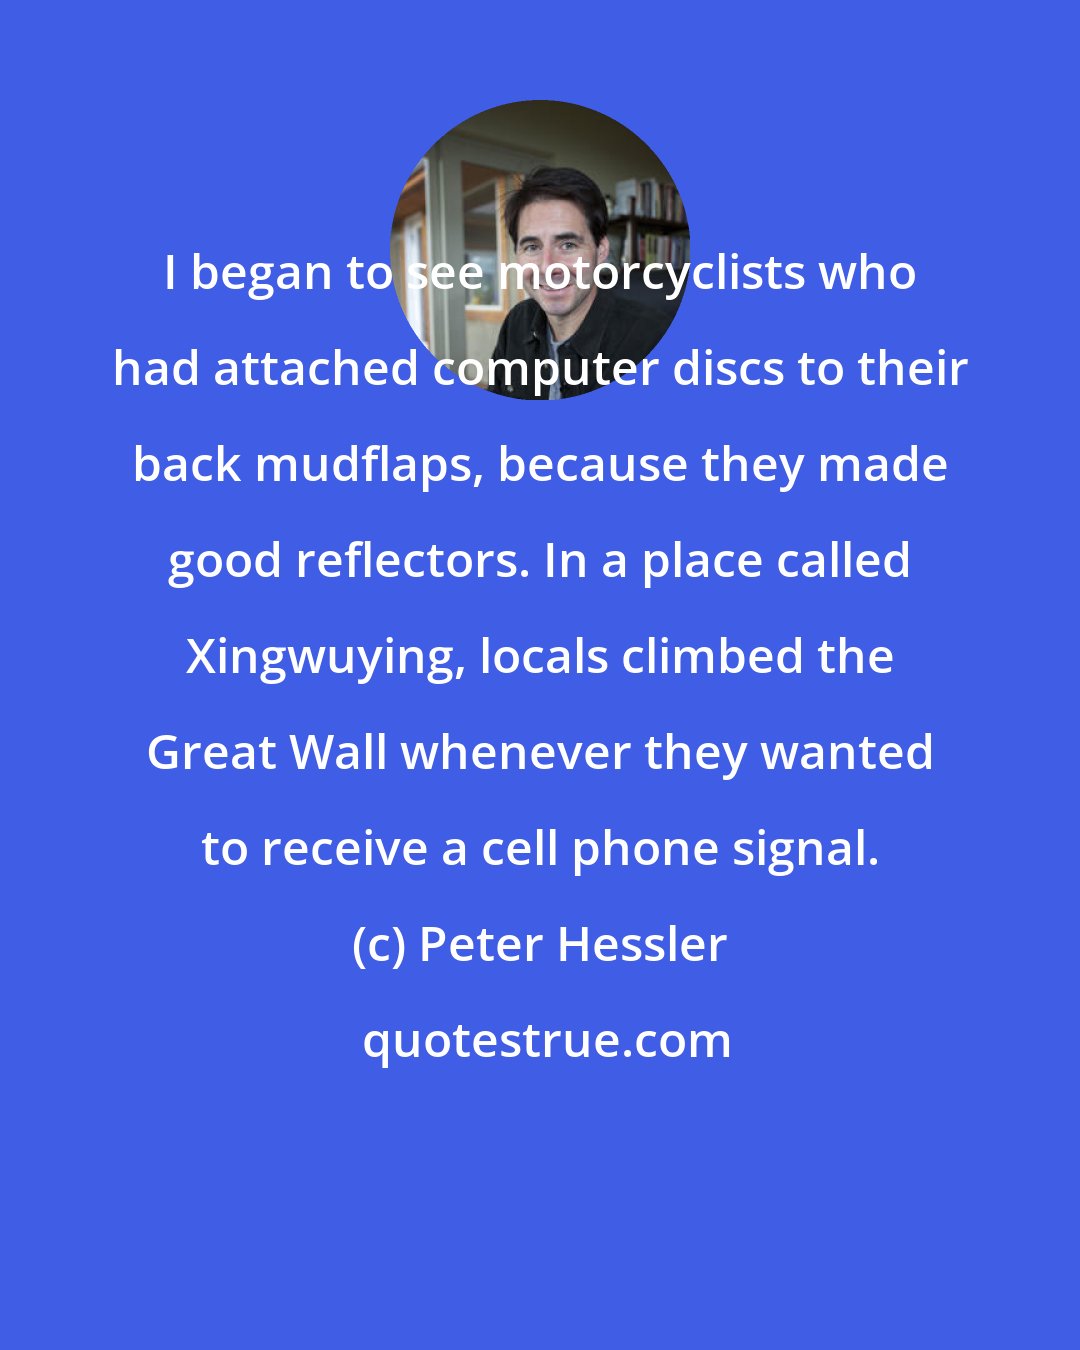 Peter Hessler: I began to see motorcyclists who had attached computer discs to their back mudflaps, because they made good reflectors. In a place called Xingwuying, locals climbed the Great Wall whenever they wanted to receive a cell phone signal.